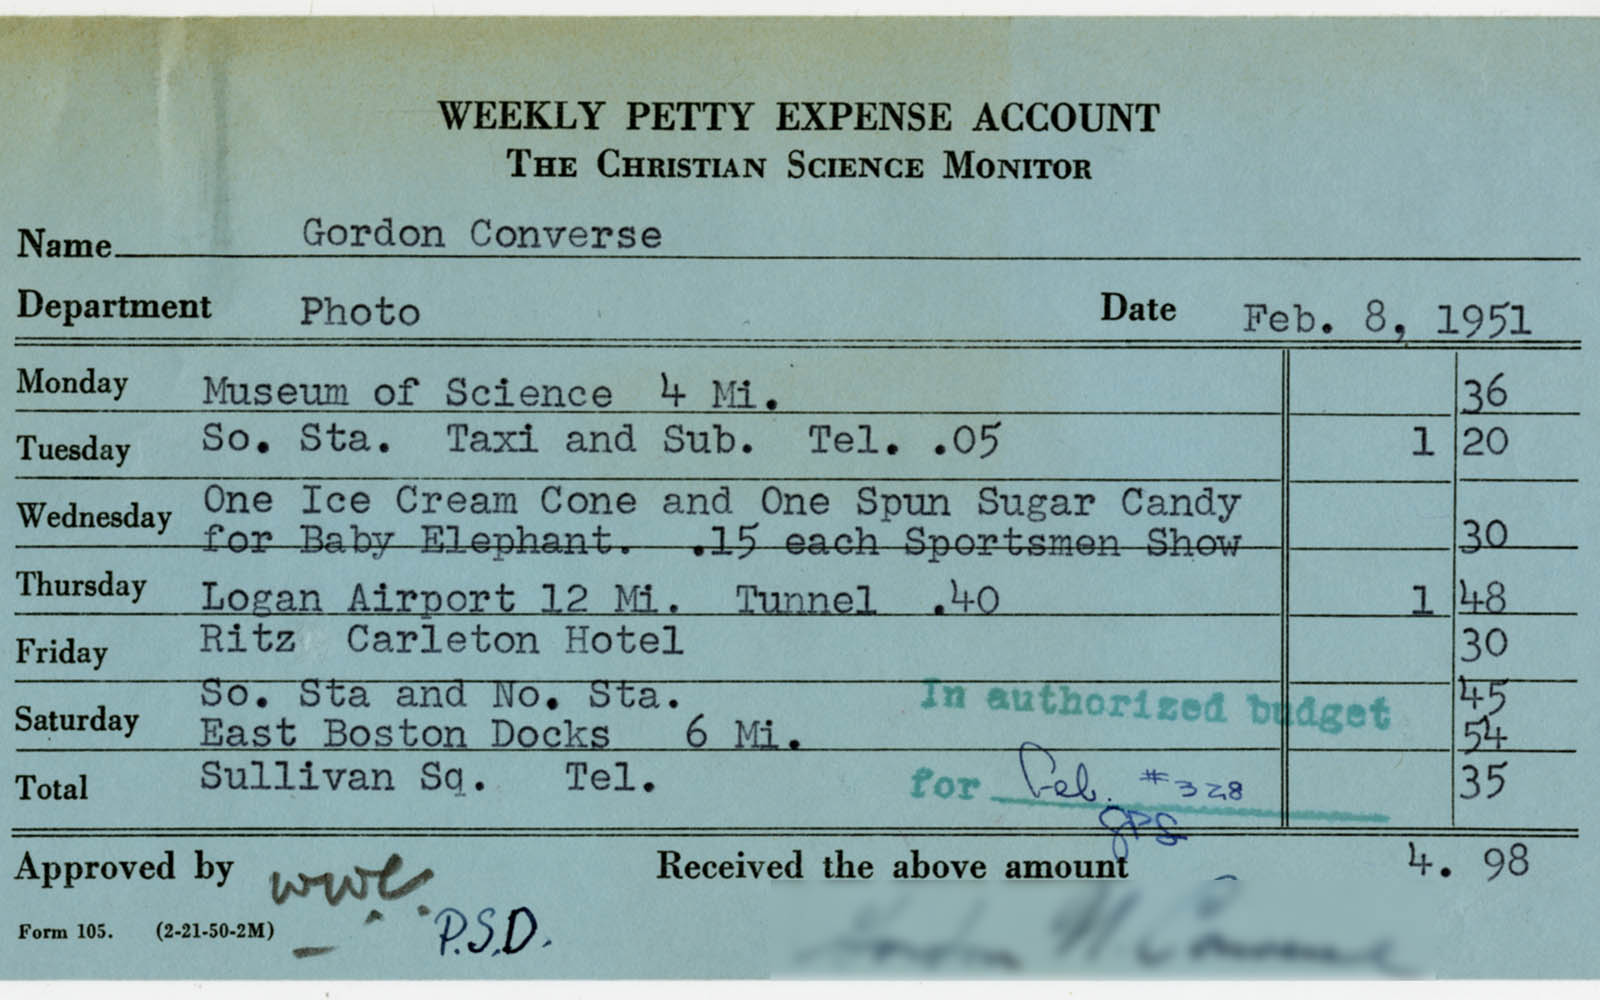 Weekly Petty Expense Account by Gordon Converse